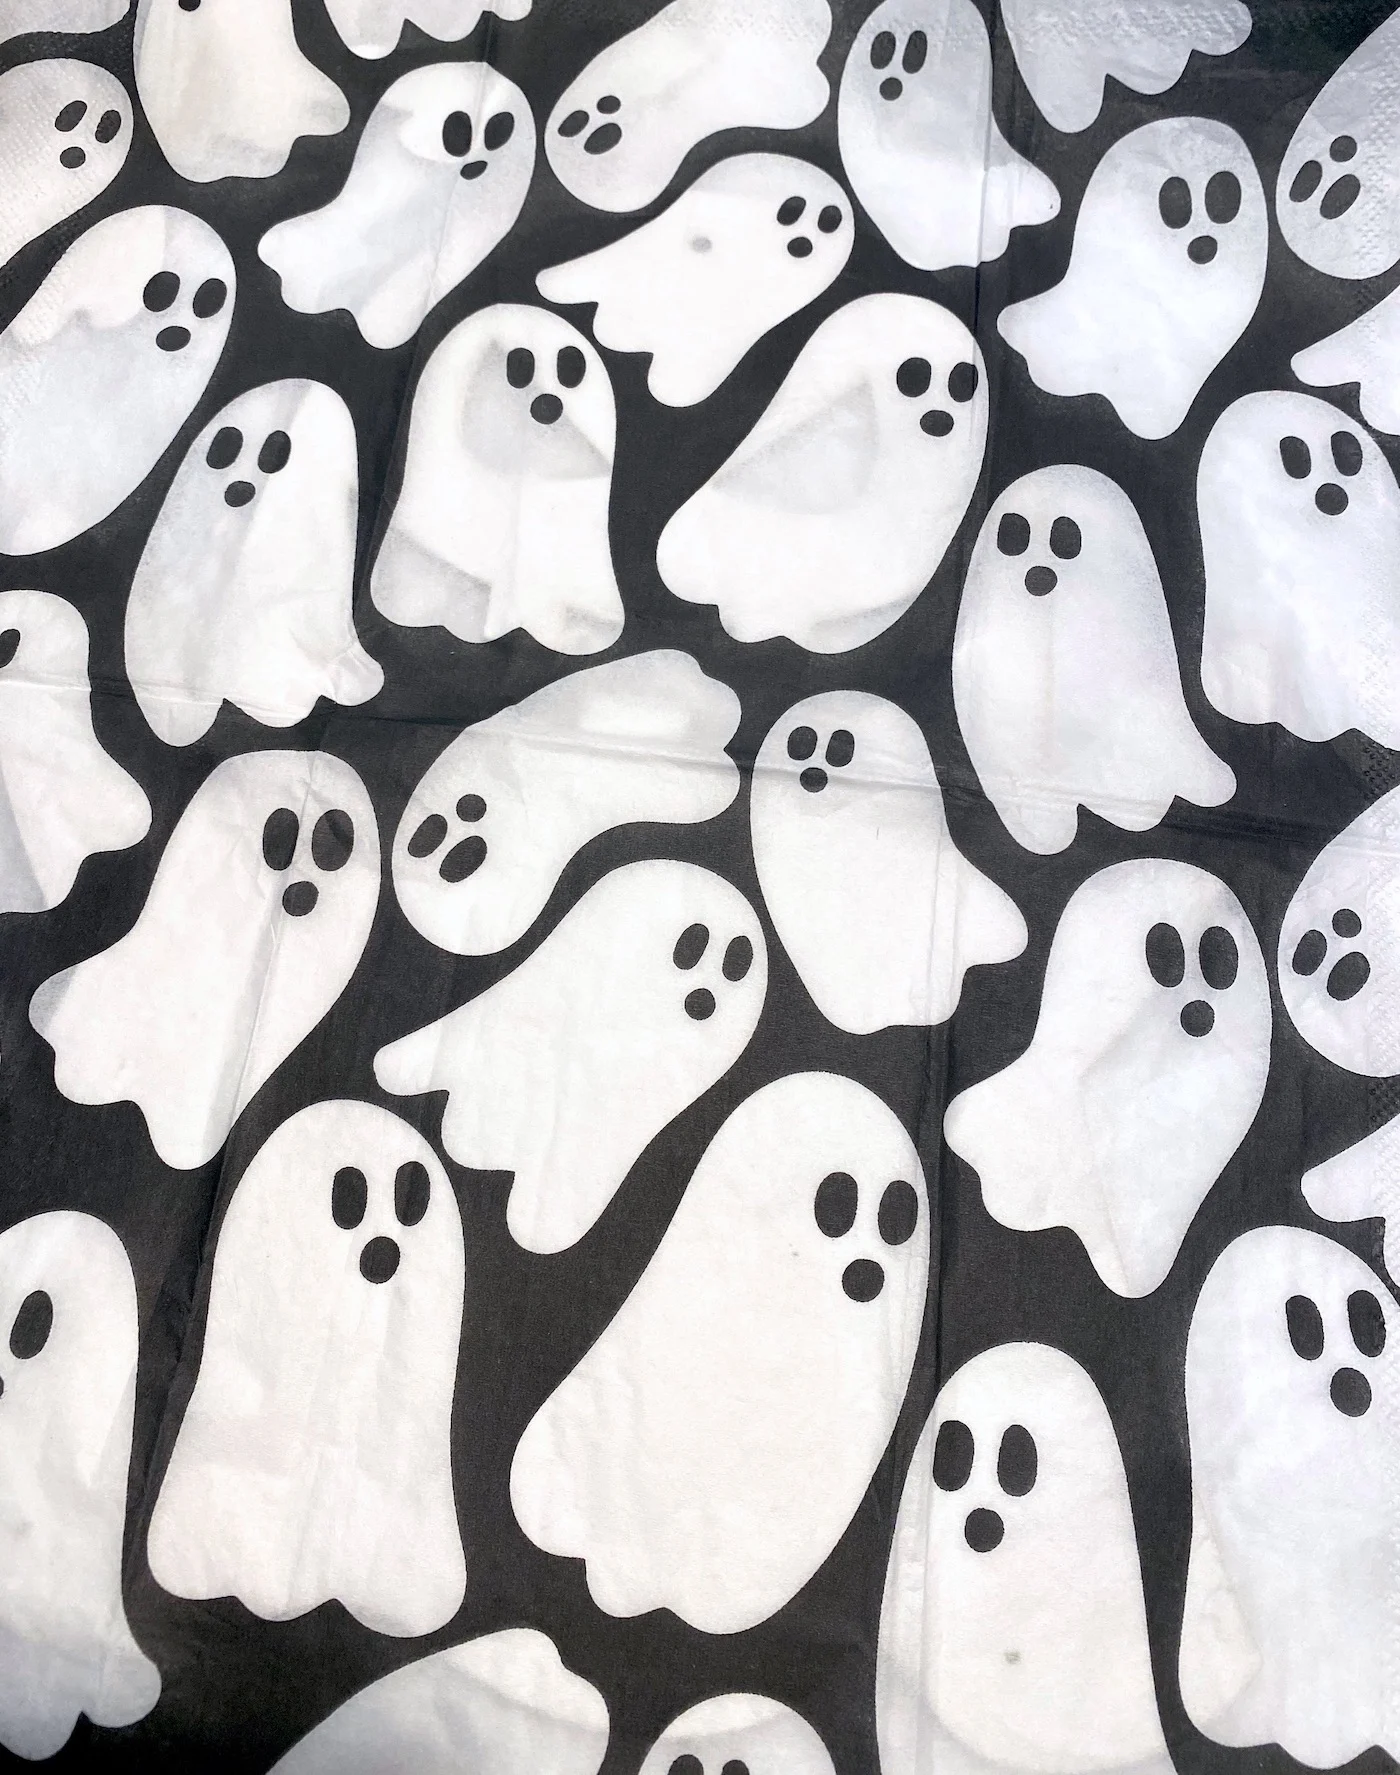 Napkin laying over the top of the ghost cutout